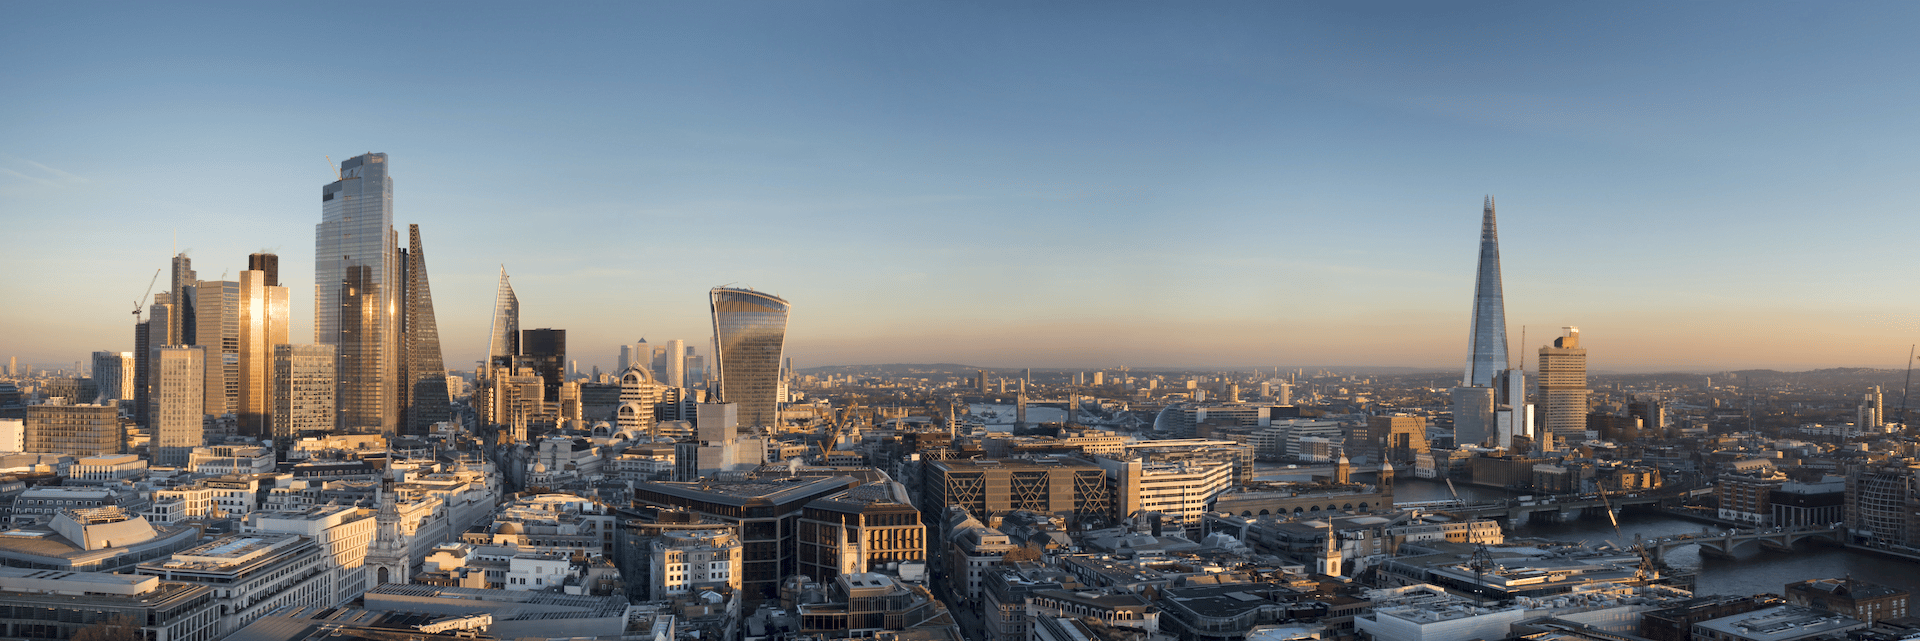 London Skyline with business district